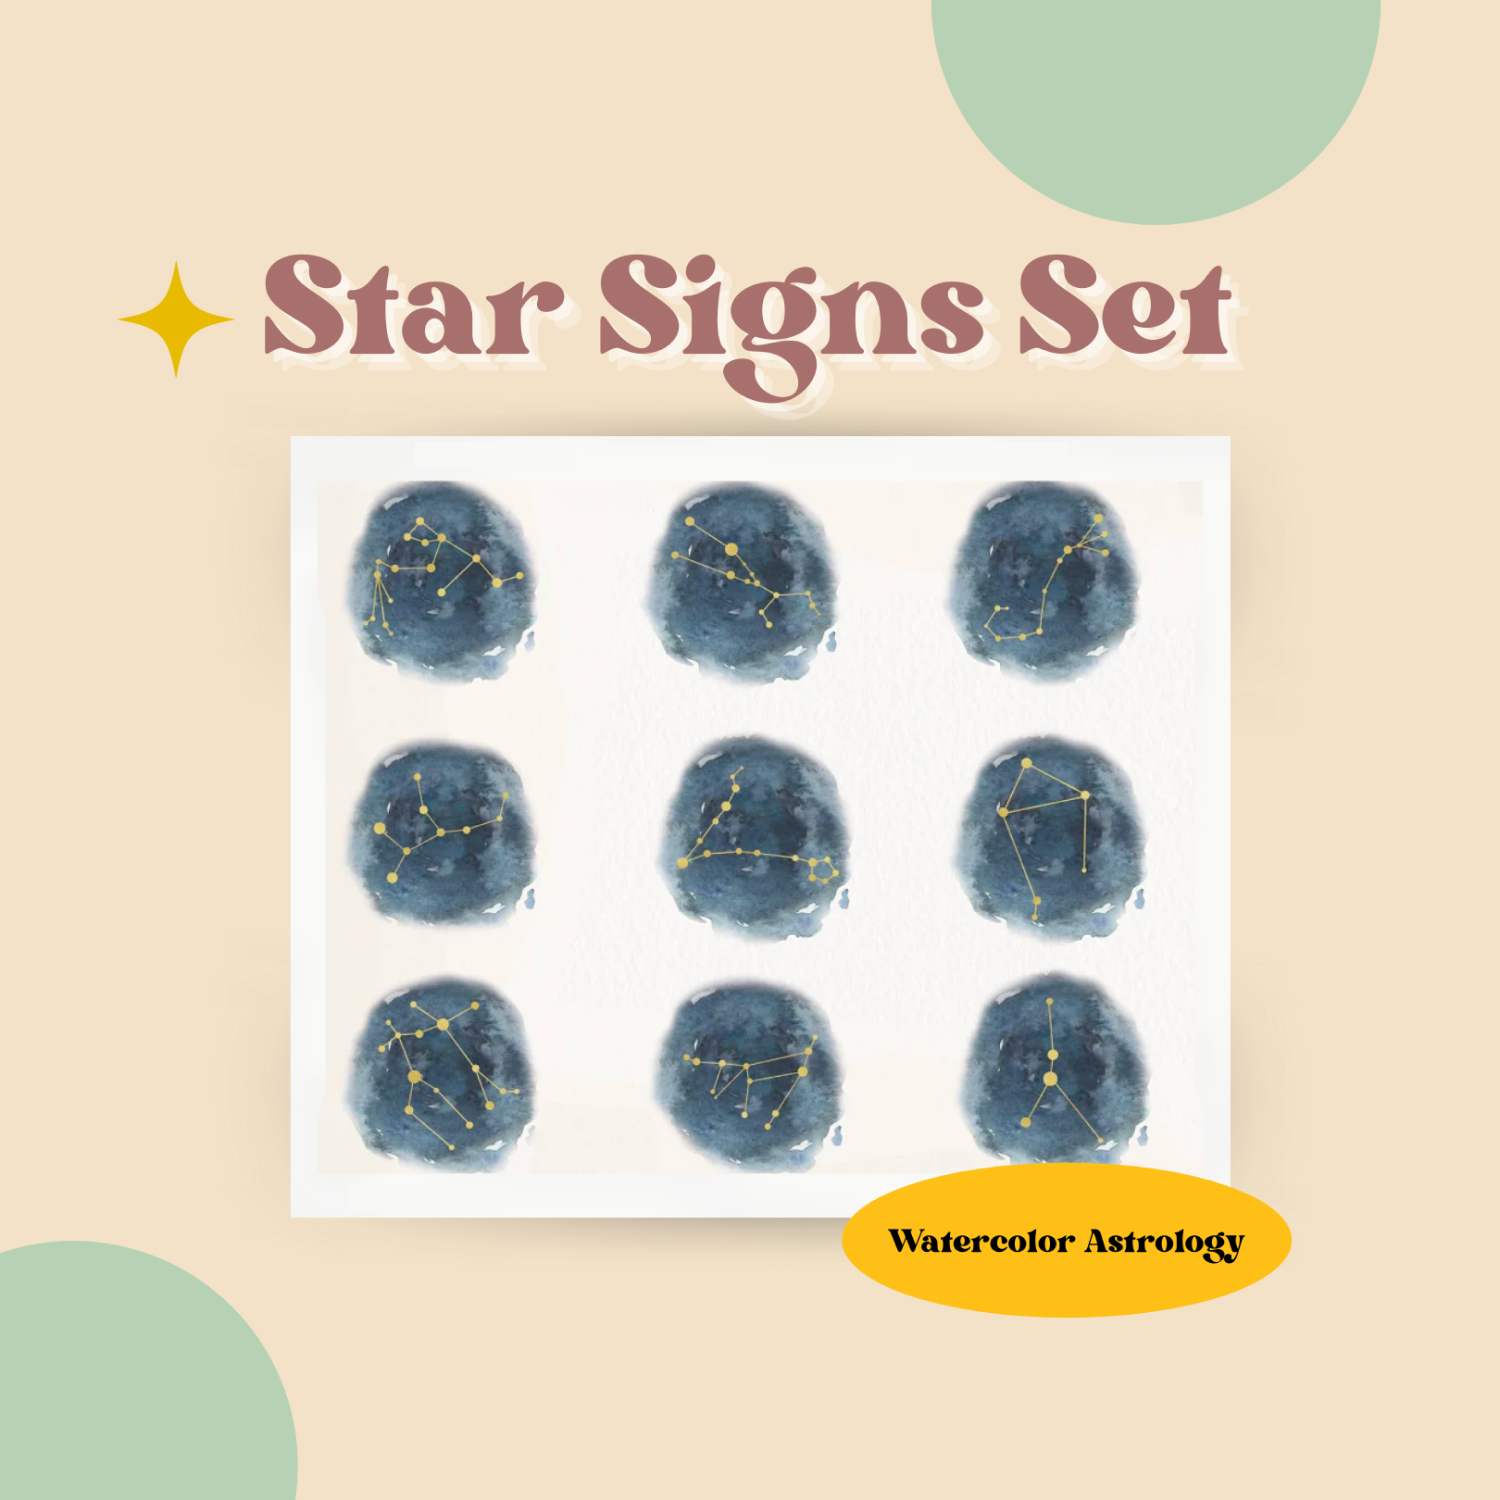 Star Signs Set Watercolor Astrology.